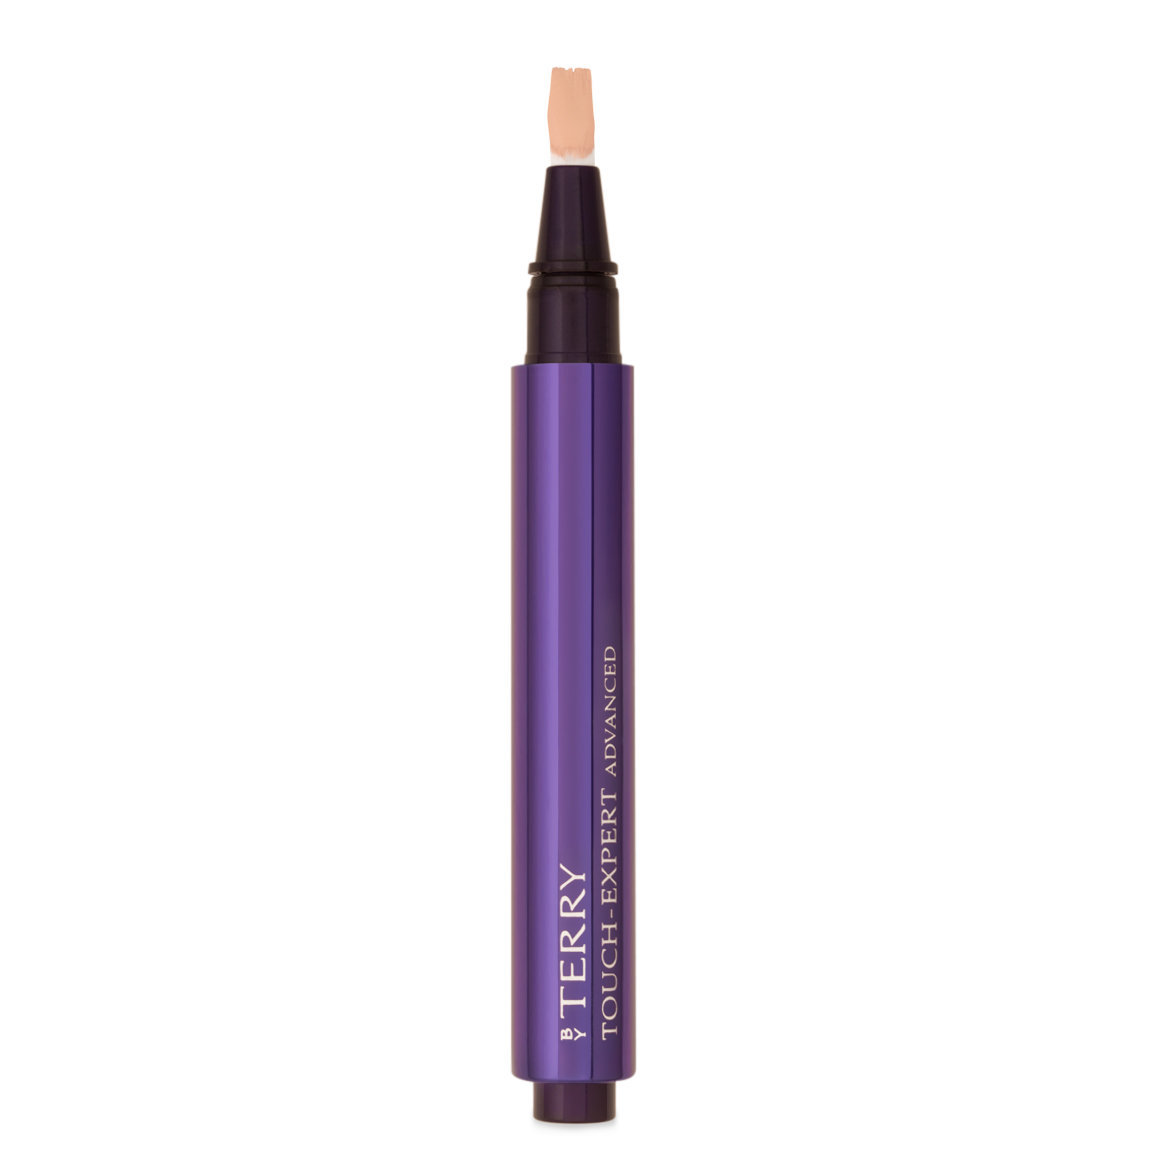 BY TERRY Touch-Expert Advanced Multi-Corrective Concealer Brush 5 Vanilla Beige alternative view 1.